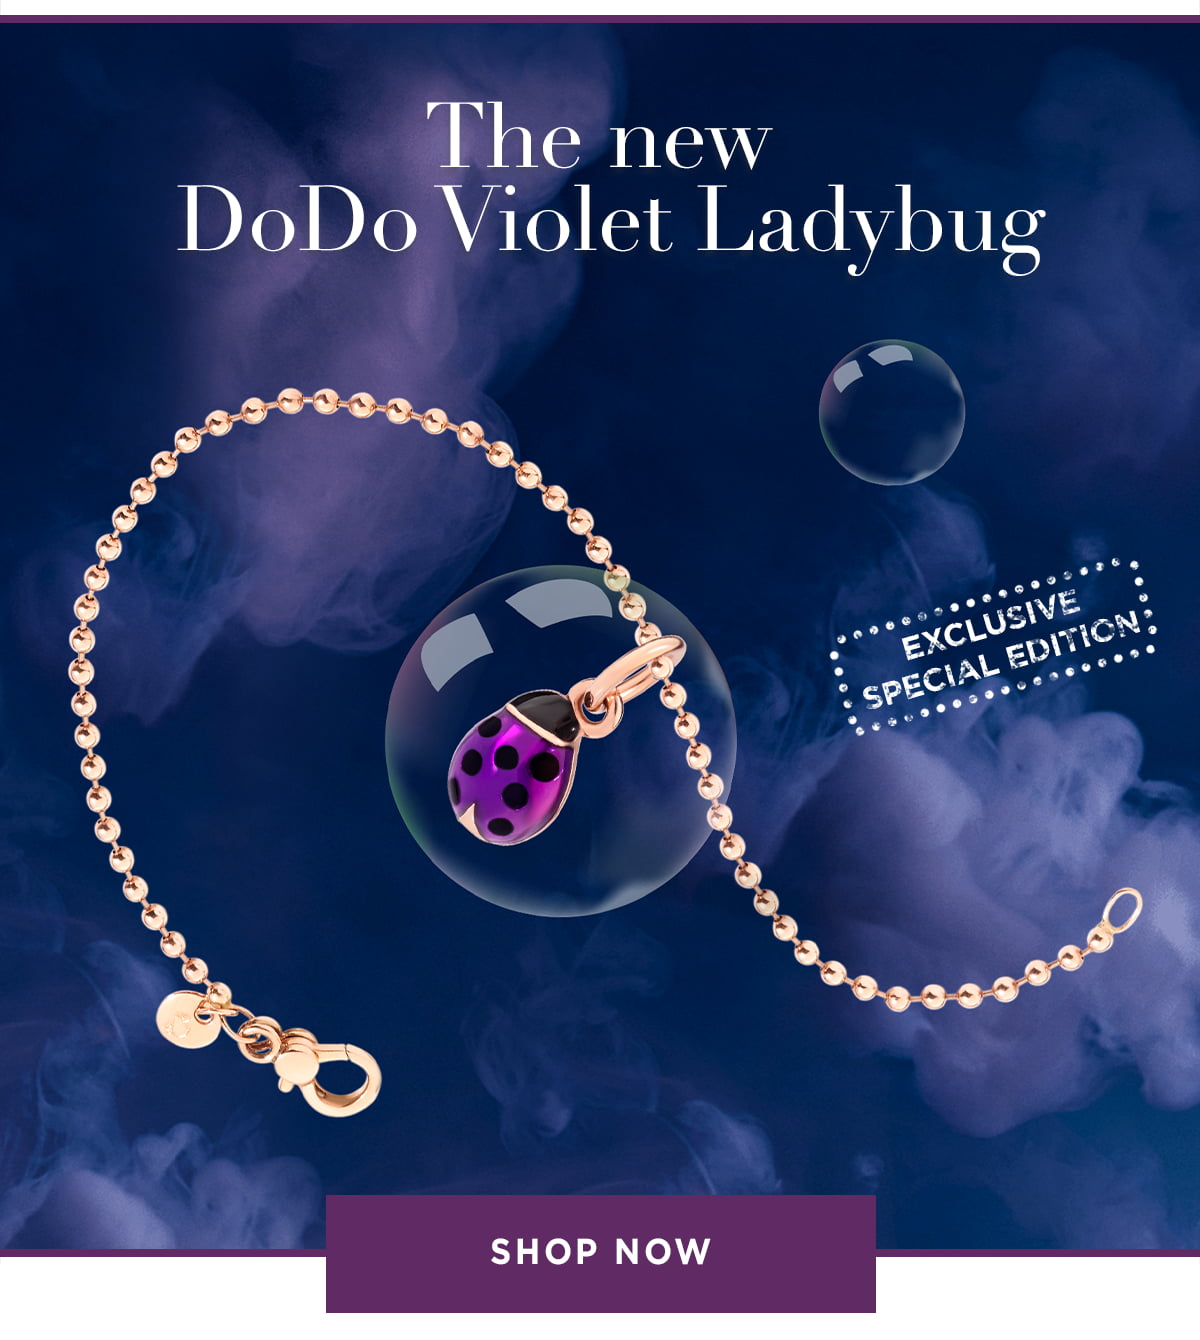 Exclusive New limited-edition Violet Ladybug